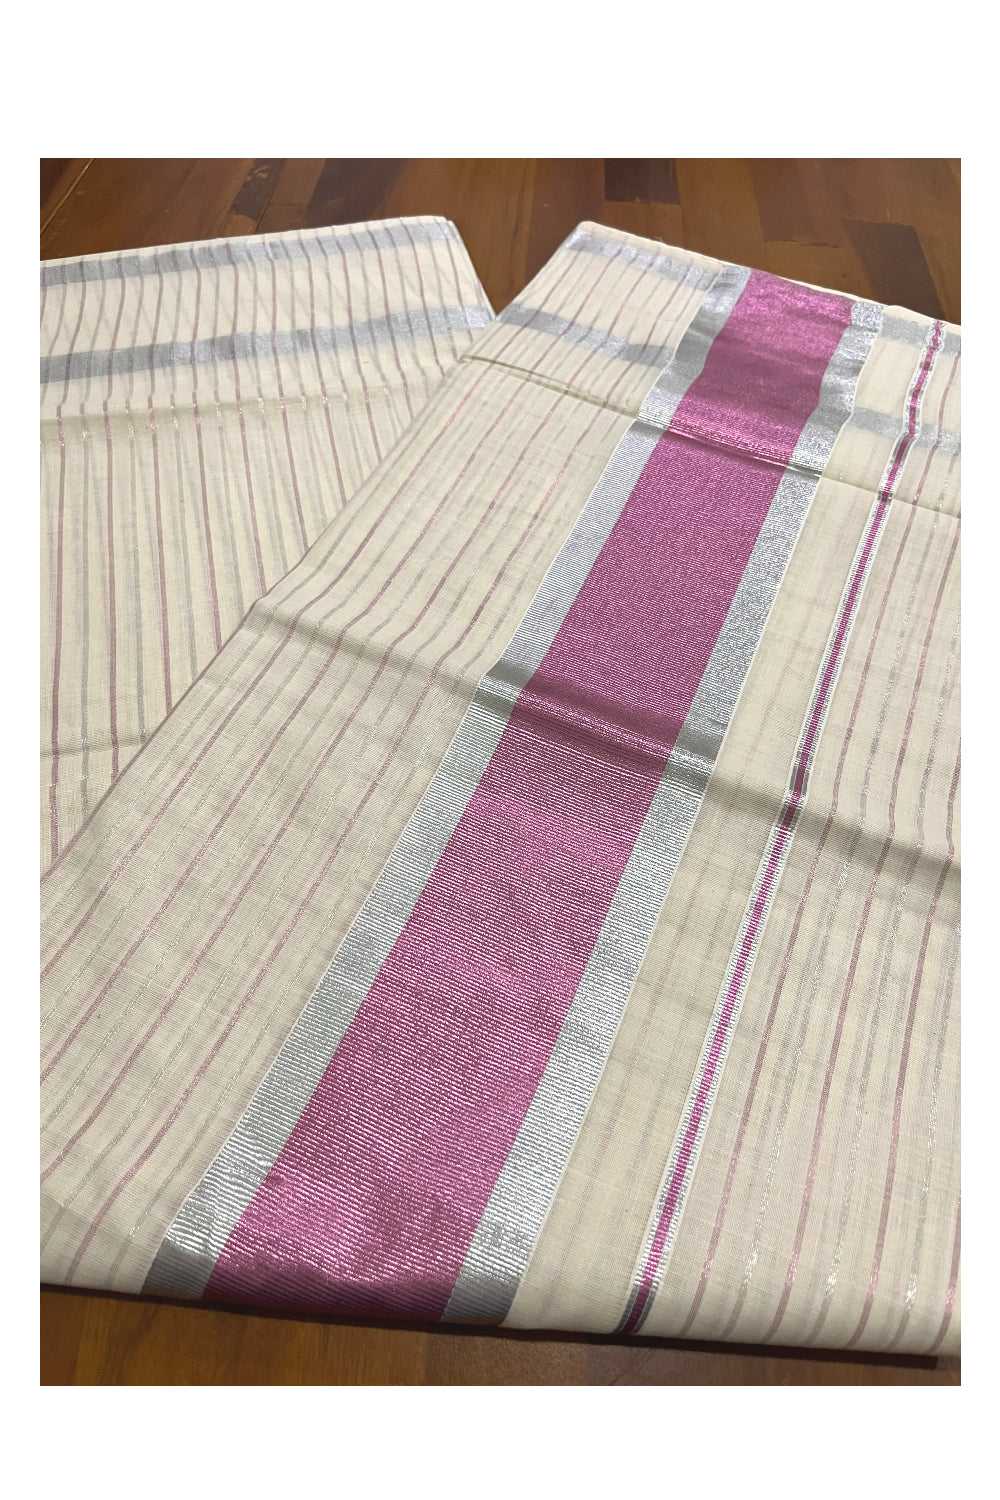 Pure Cotton Kerala Saree with Silver and Pink Kasavu Lines Across Body